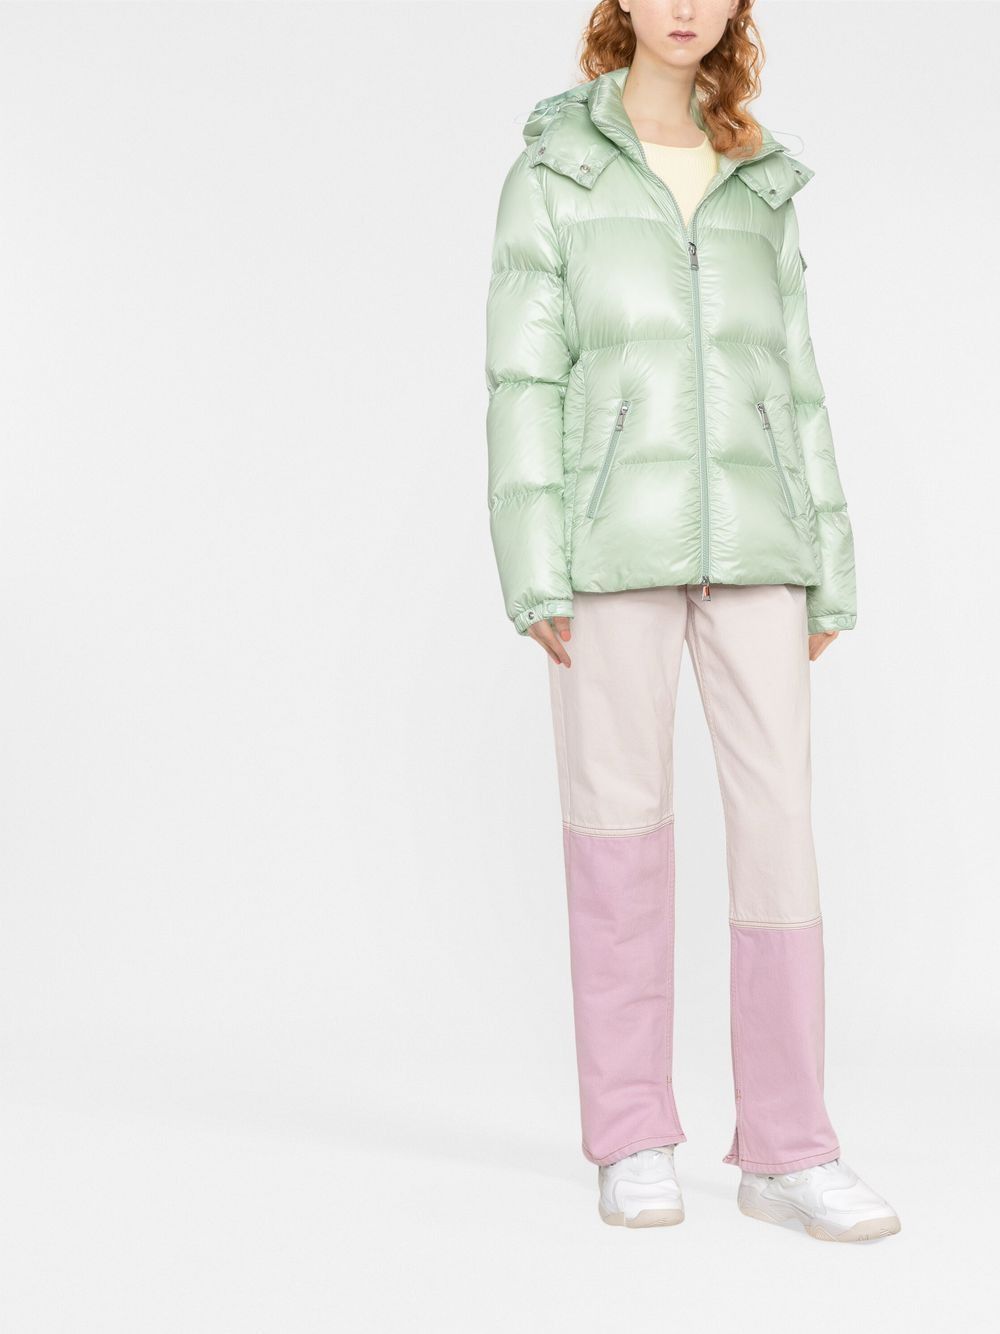 MONCLER Classic Carryover Fourmine Jacket for Women